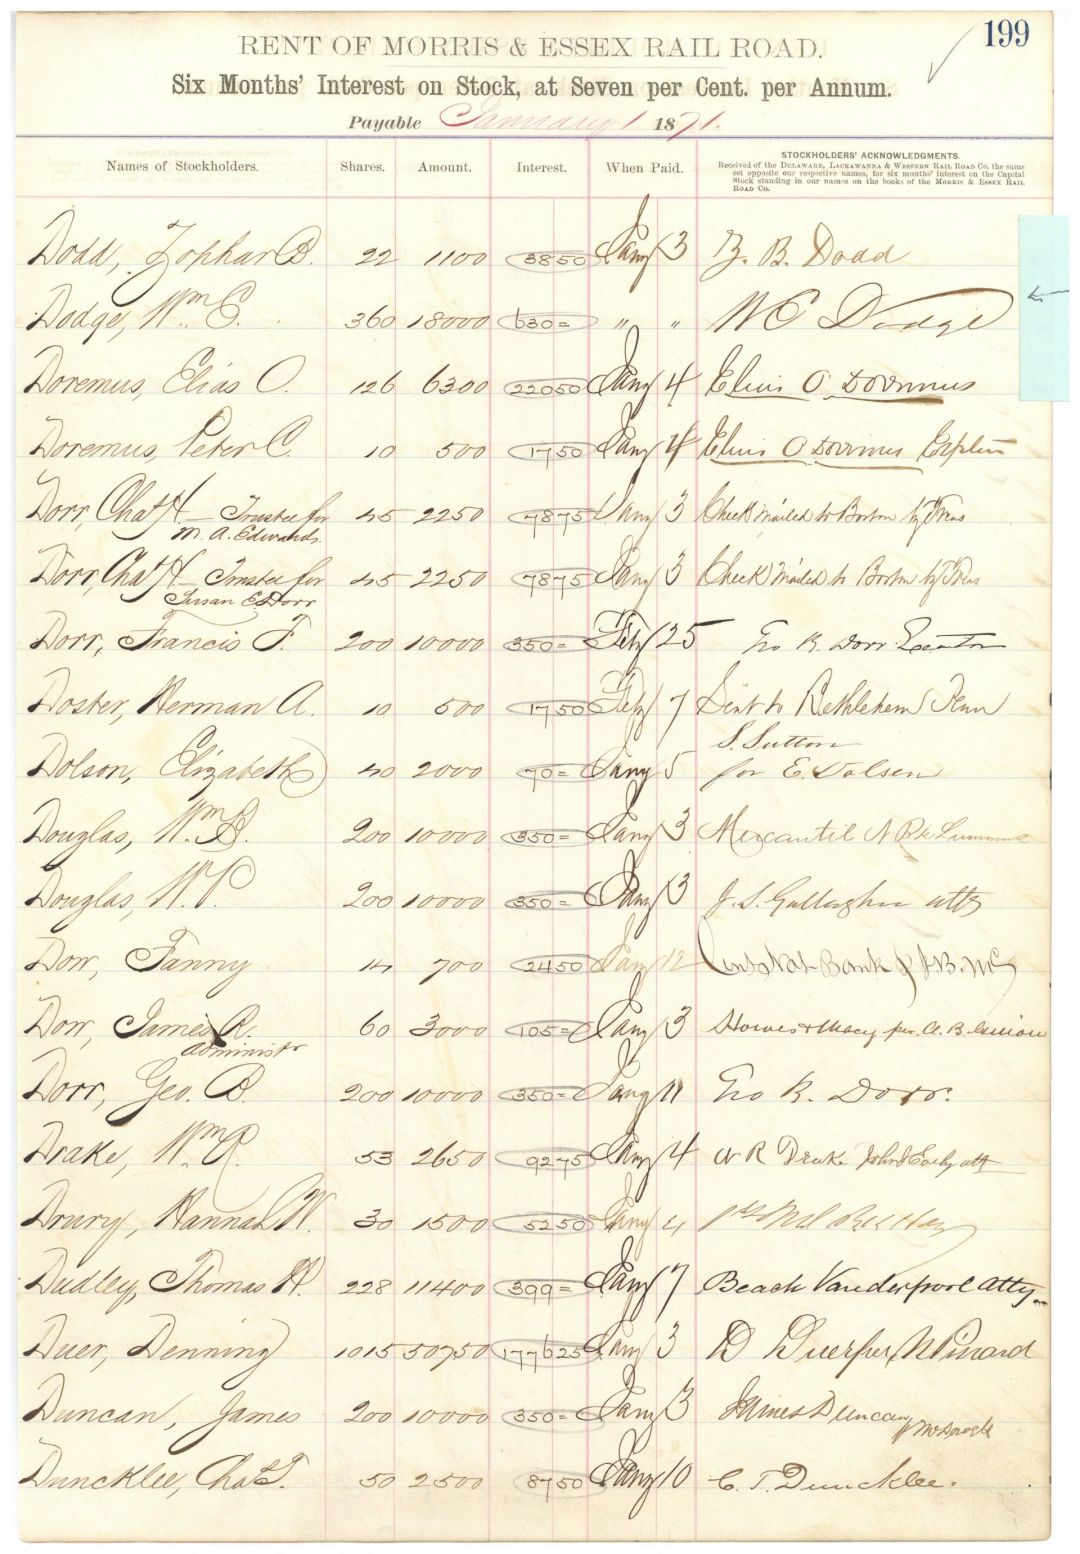 Stock Interest Sheet signed by William E. Dodge - 1869-1871 dated Autograph - Morris and Essex Railroadiana